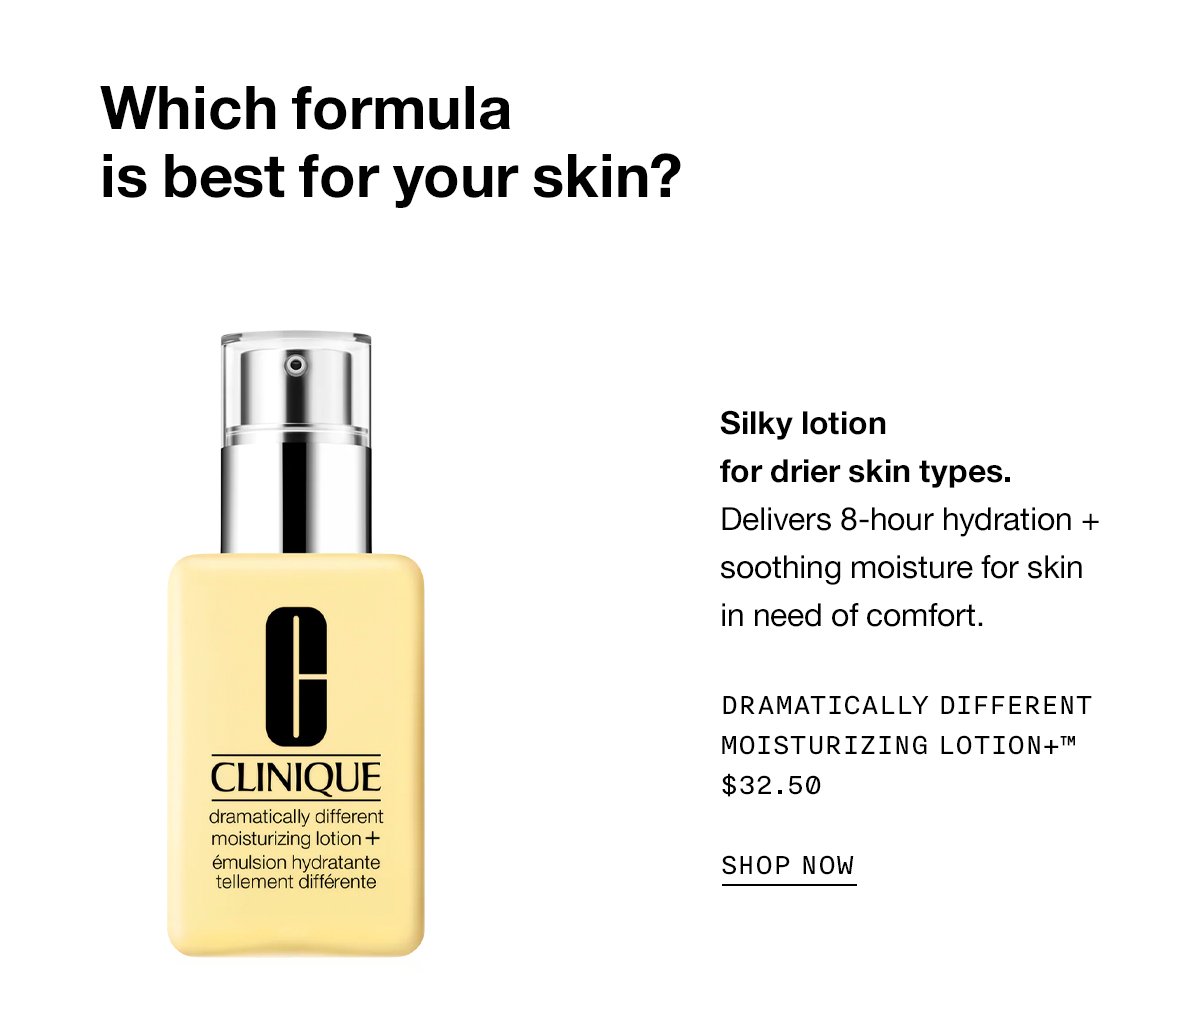 Which formula is best for your skin? Silky lotion for drier skin types. Delivers 8-hour hydration + soothing moisture for skin in need of comfort. DRAMTICALLY DIFFERENT MOISTURIZING LOTION+™ $32.50 SHOP NOW